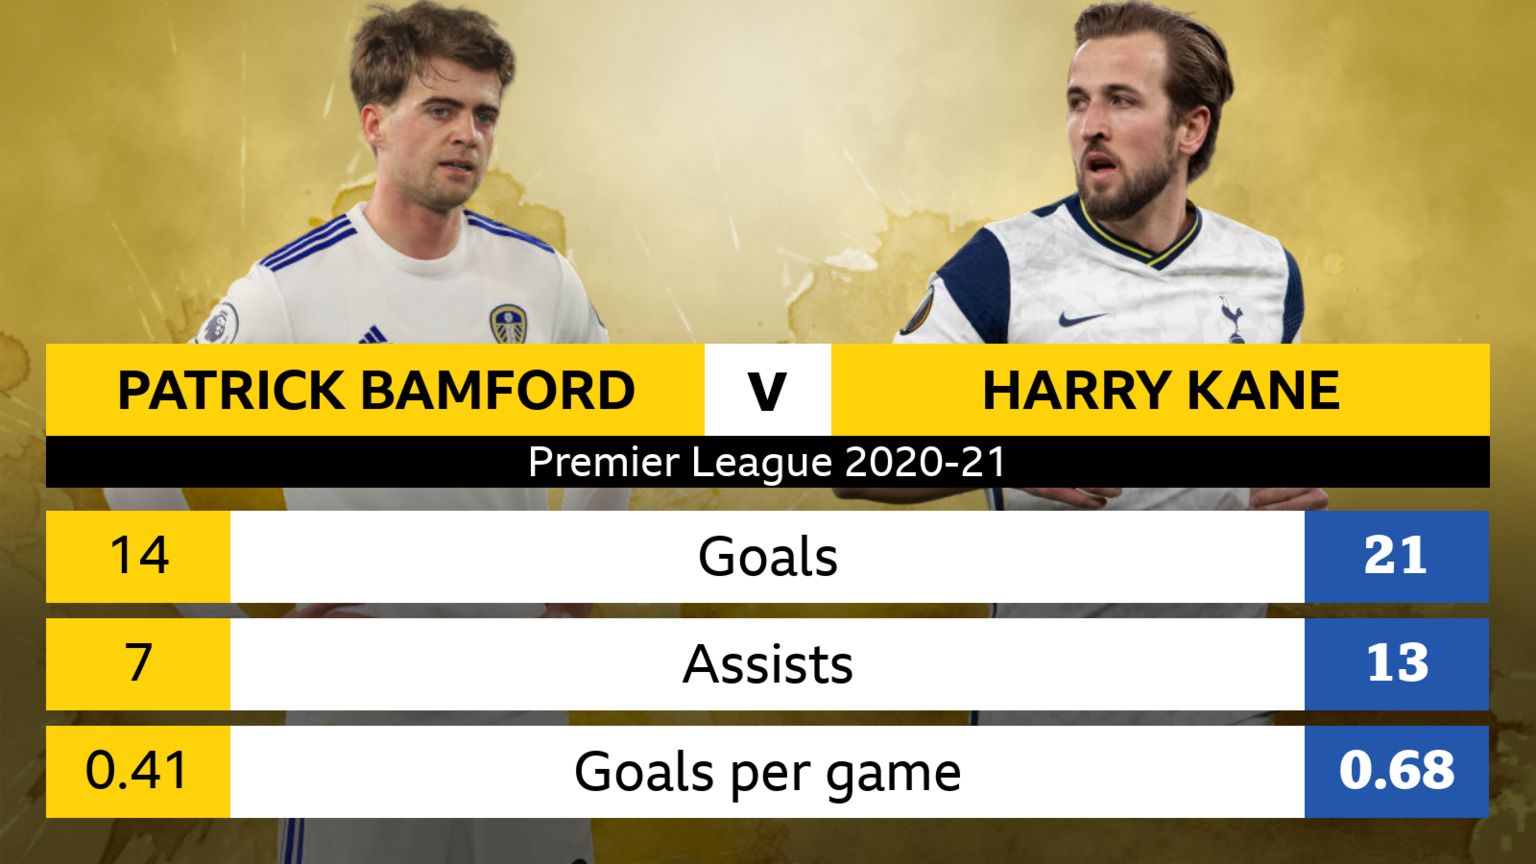 Patrick Bamford and Harry Kane head to head graphic (Bamford's stats first) - Goals: 14-21; assists: 7-13; goals per game 0.41-0.68